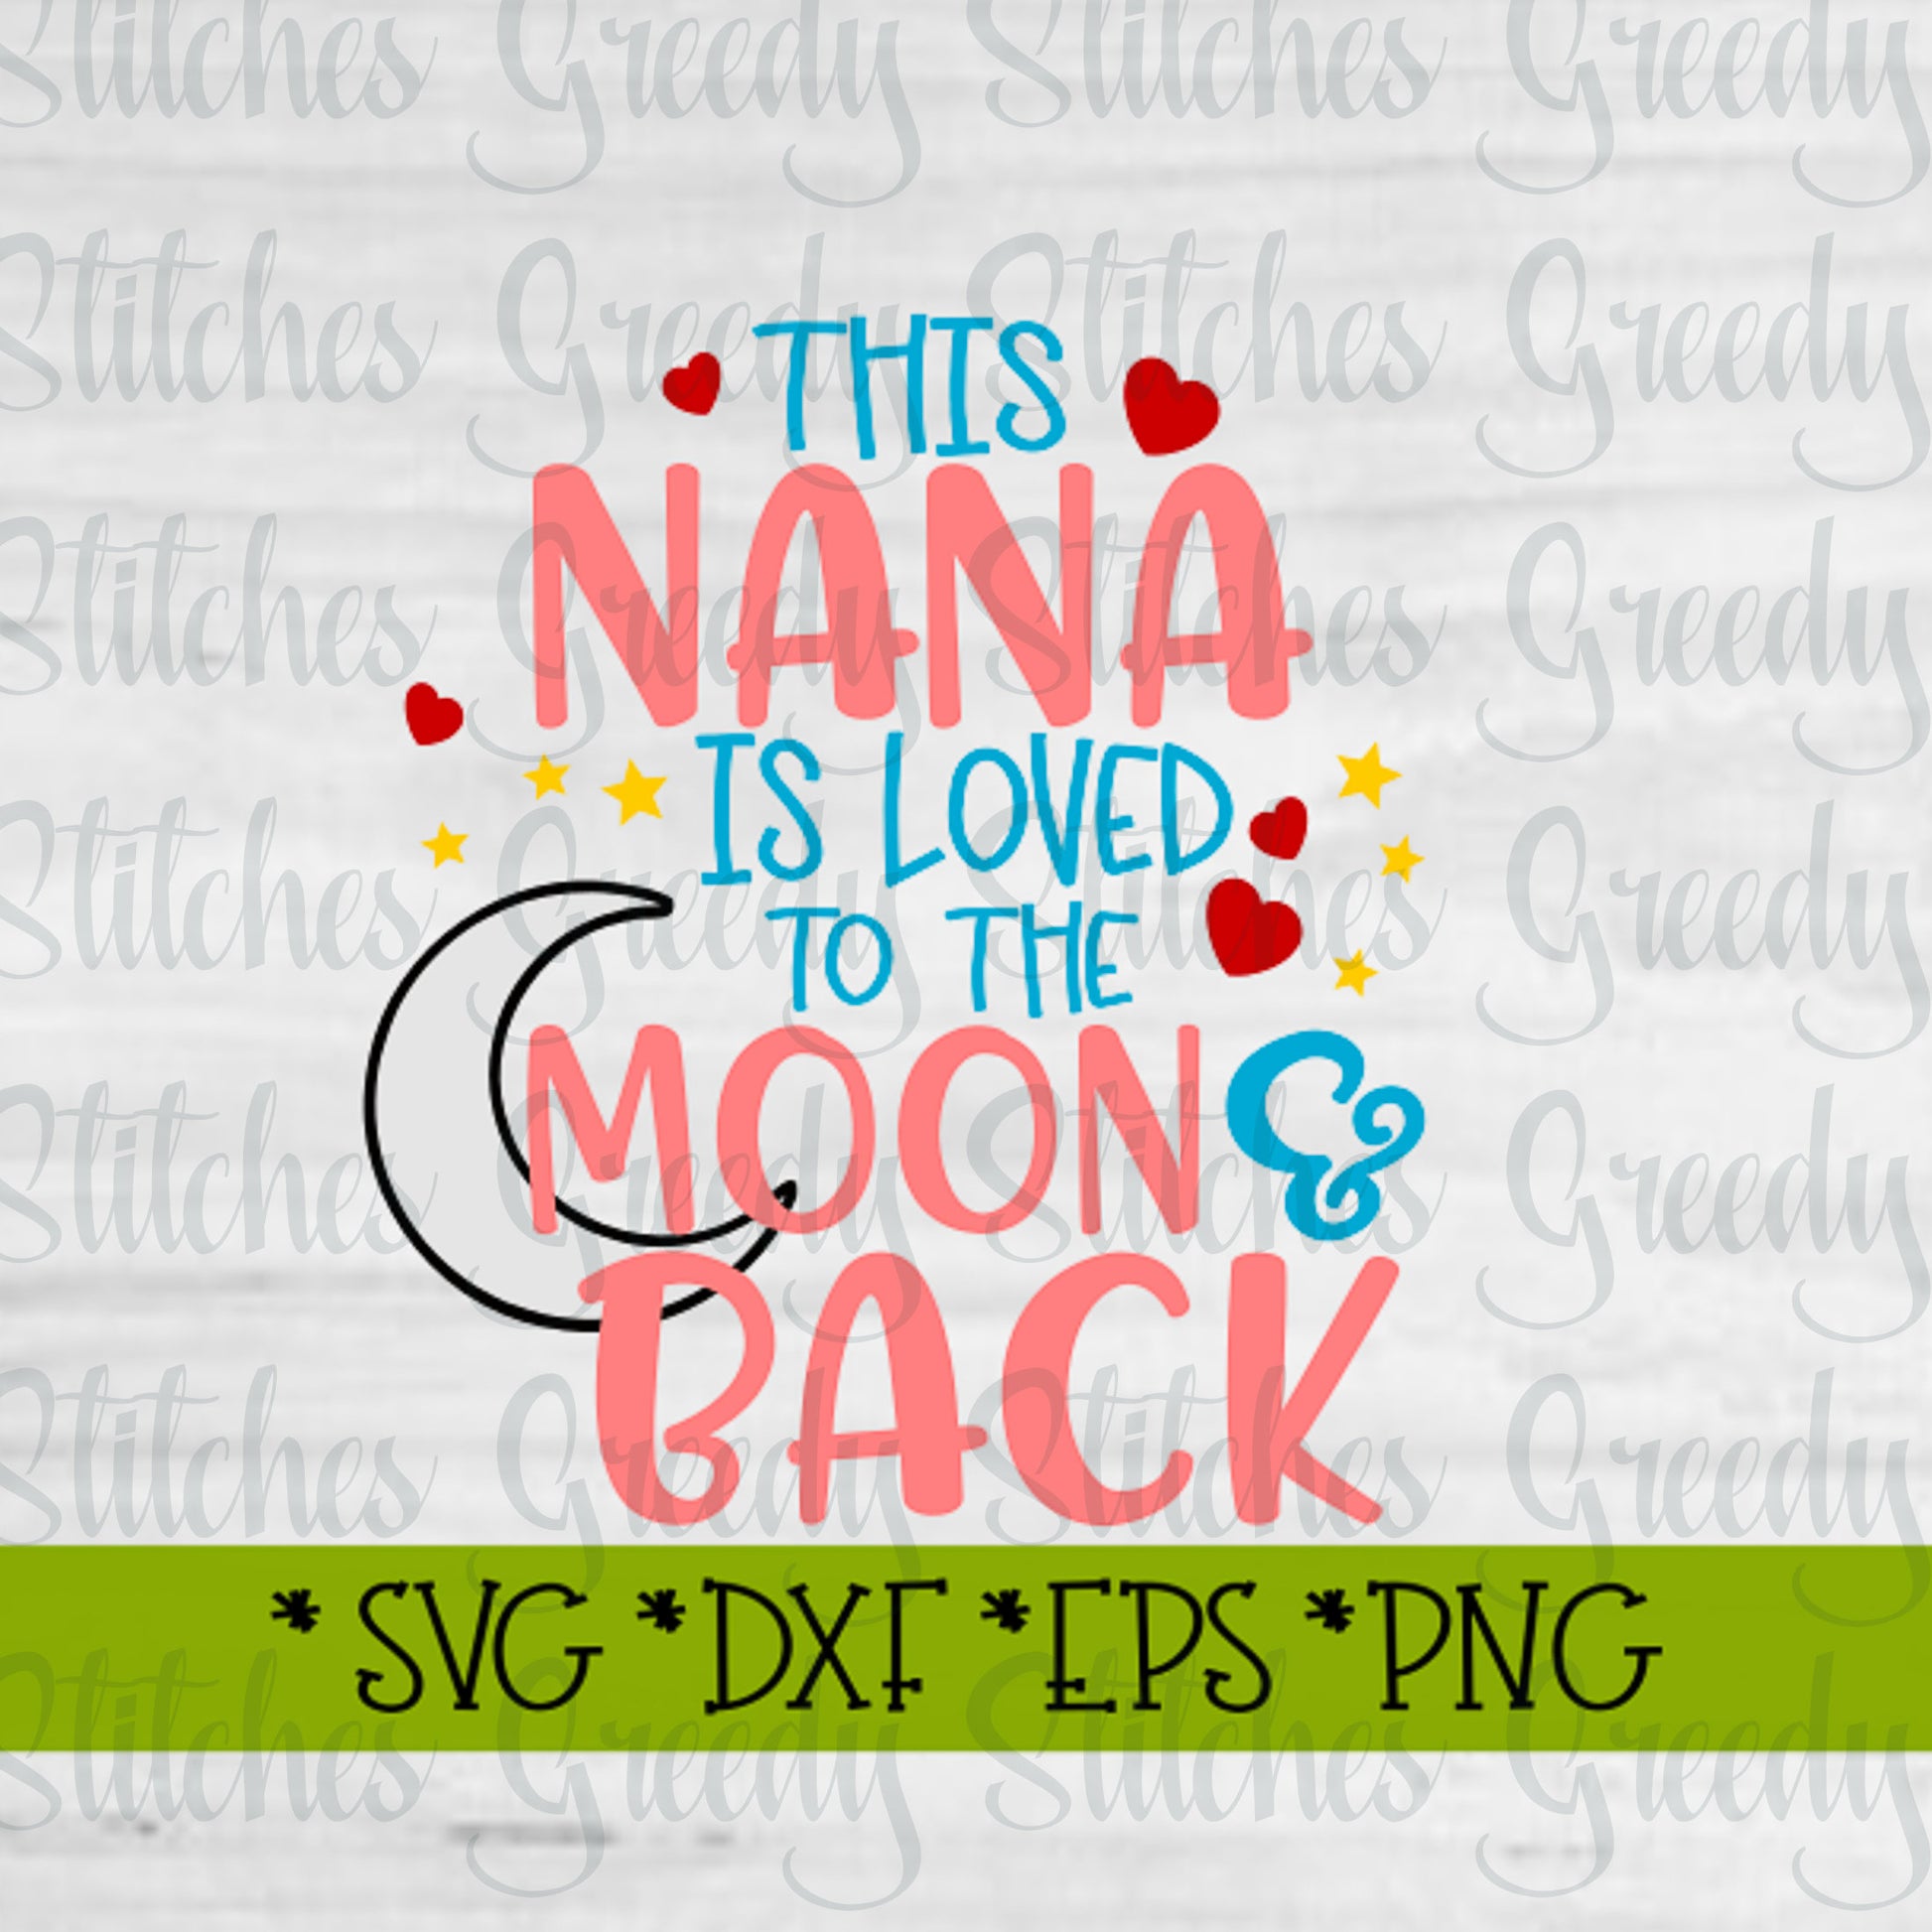 Mother&#39;s Day | This Nana Is Loved To The Moon & Back svg, dxf, eps, png, wmf. Nana SVG | Nana Is Loved SVG | Instant Download Cut File